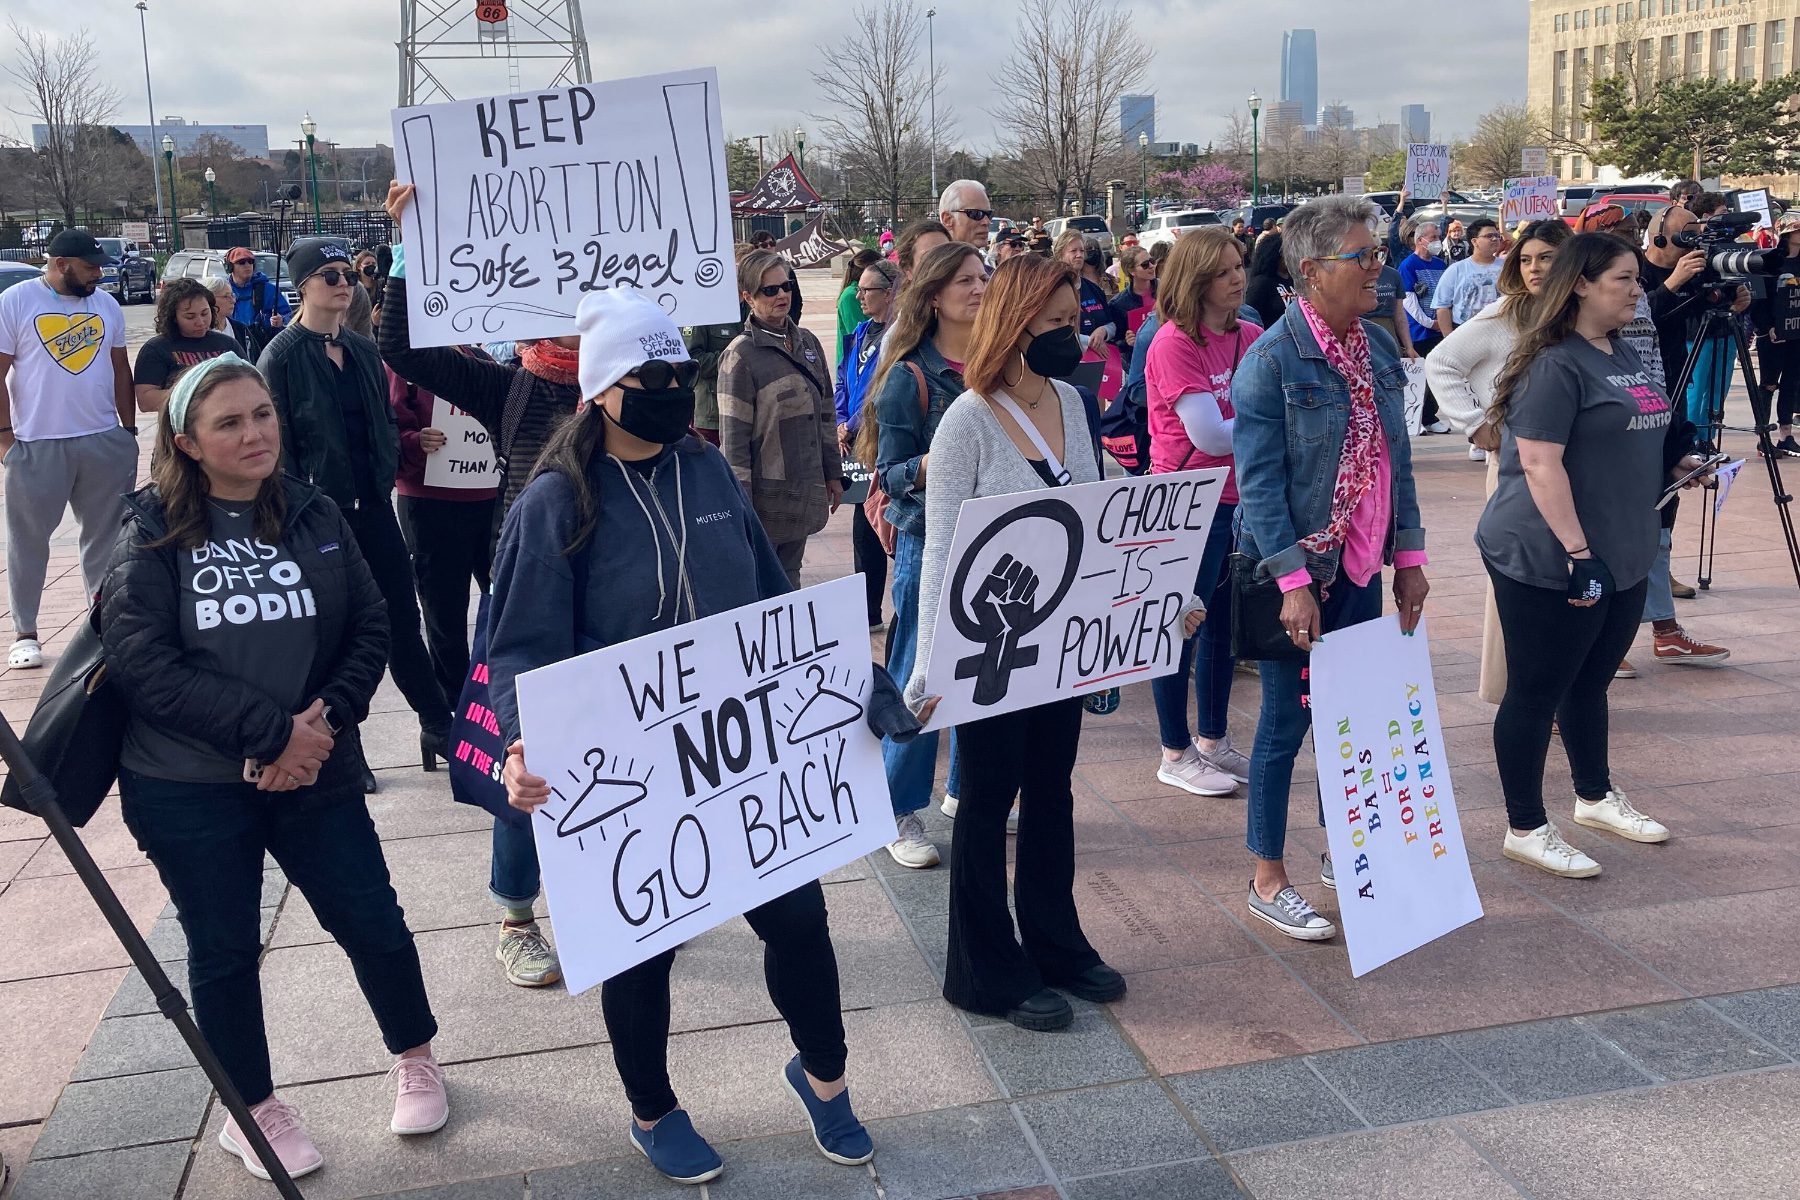 Abortion rights advocates gather outside the Oklahoma Capitol on Tuesday, April 5, 2022, in Oklahoma City, to protest several anti-abortion bills being considered by the legislature.